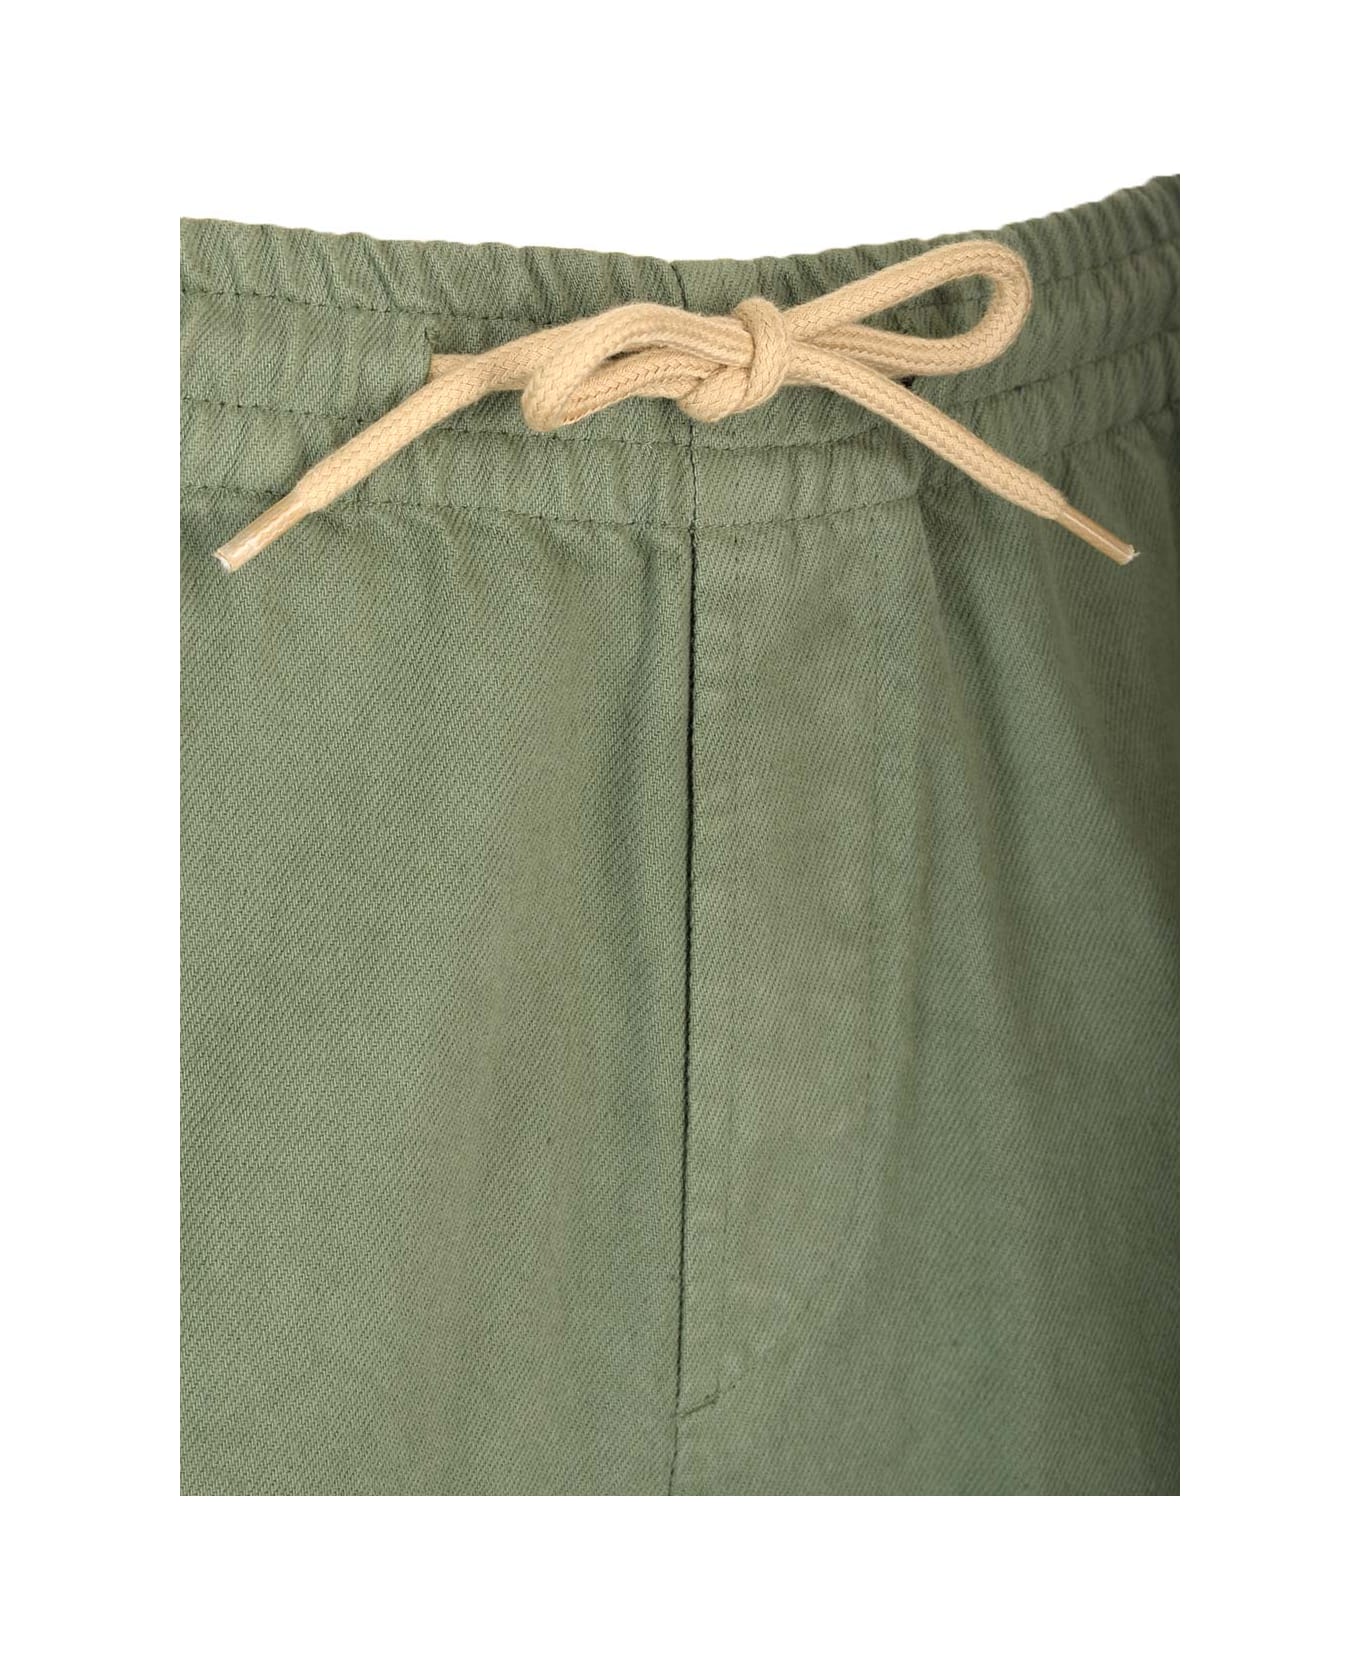 A.P.C. Vincent Trousers - Green ボトムス